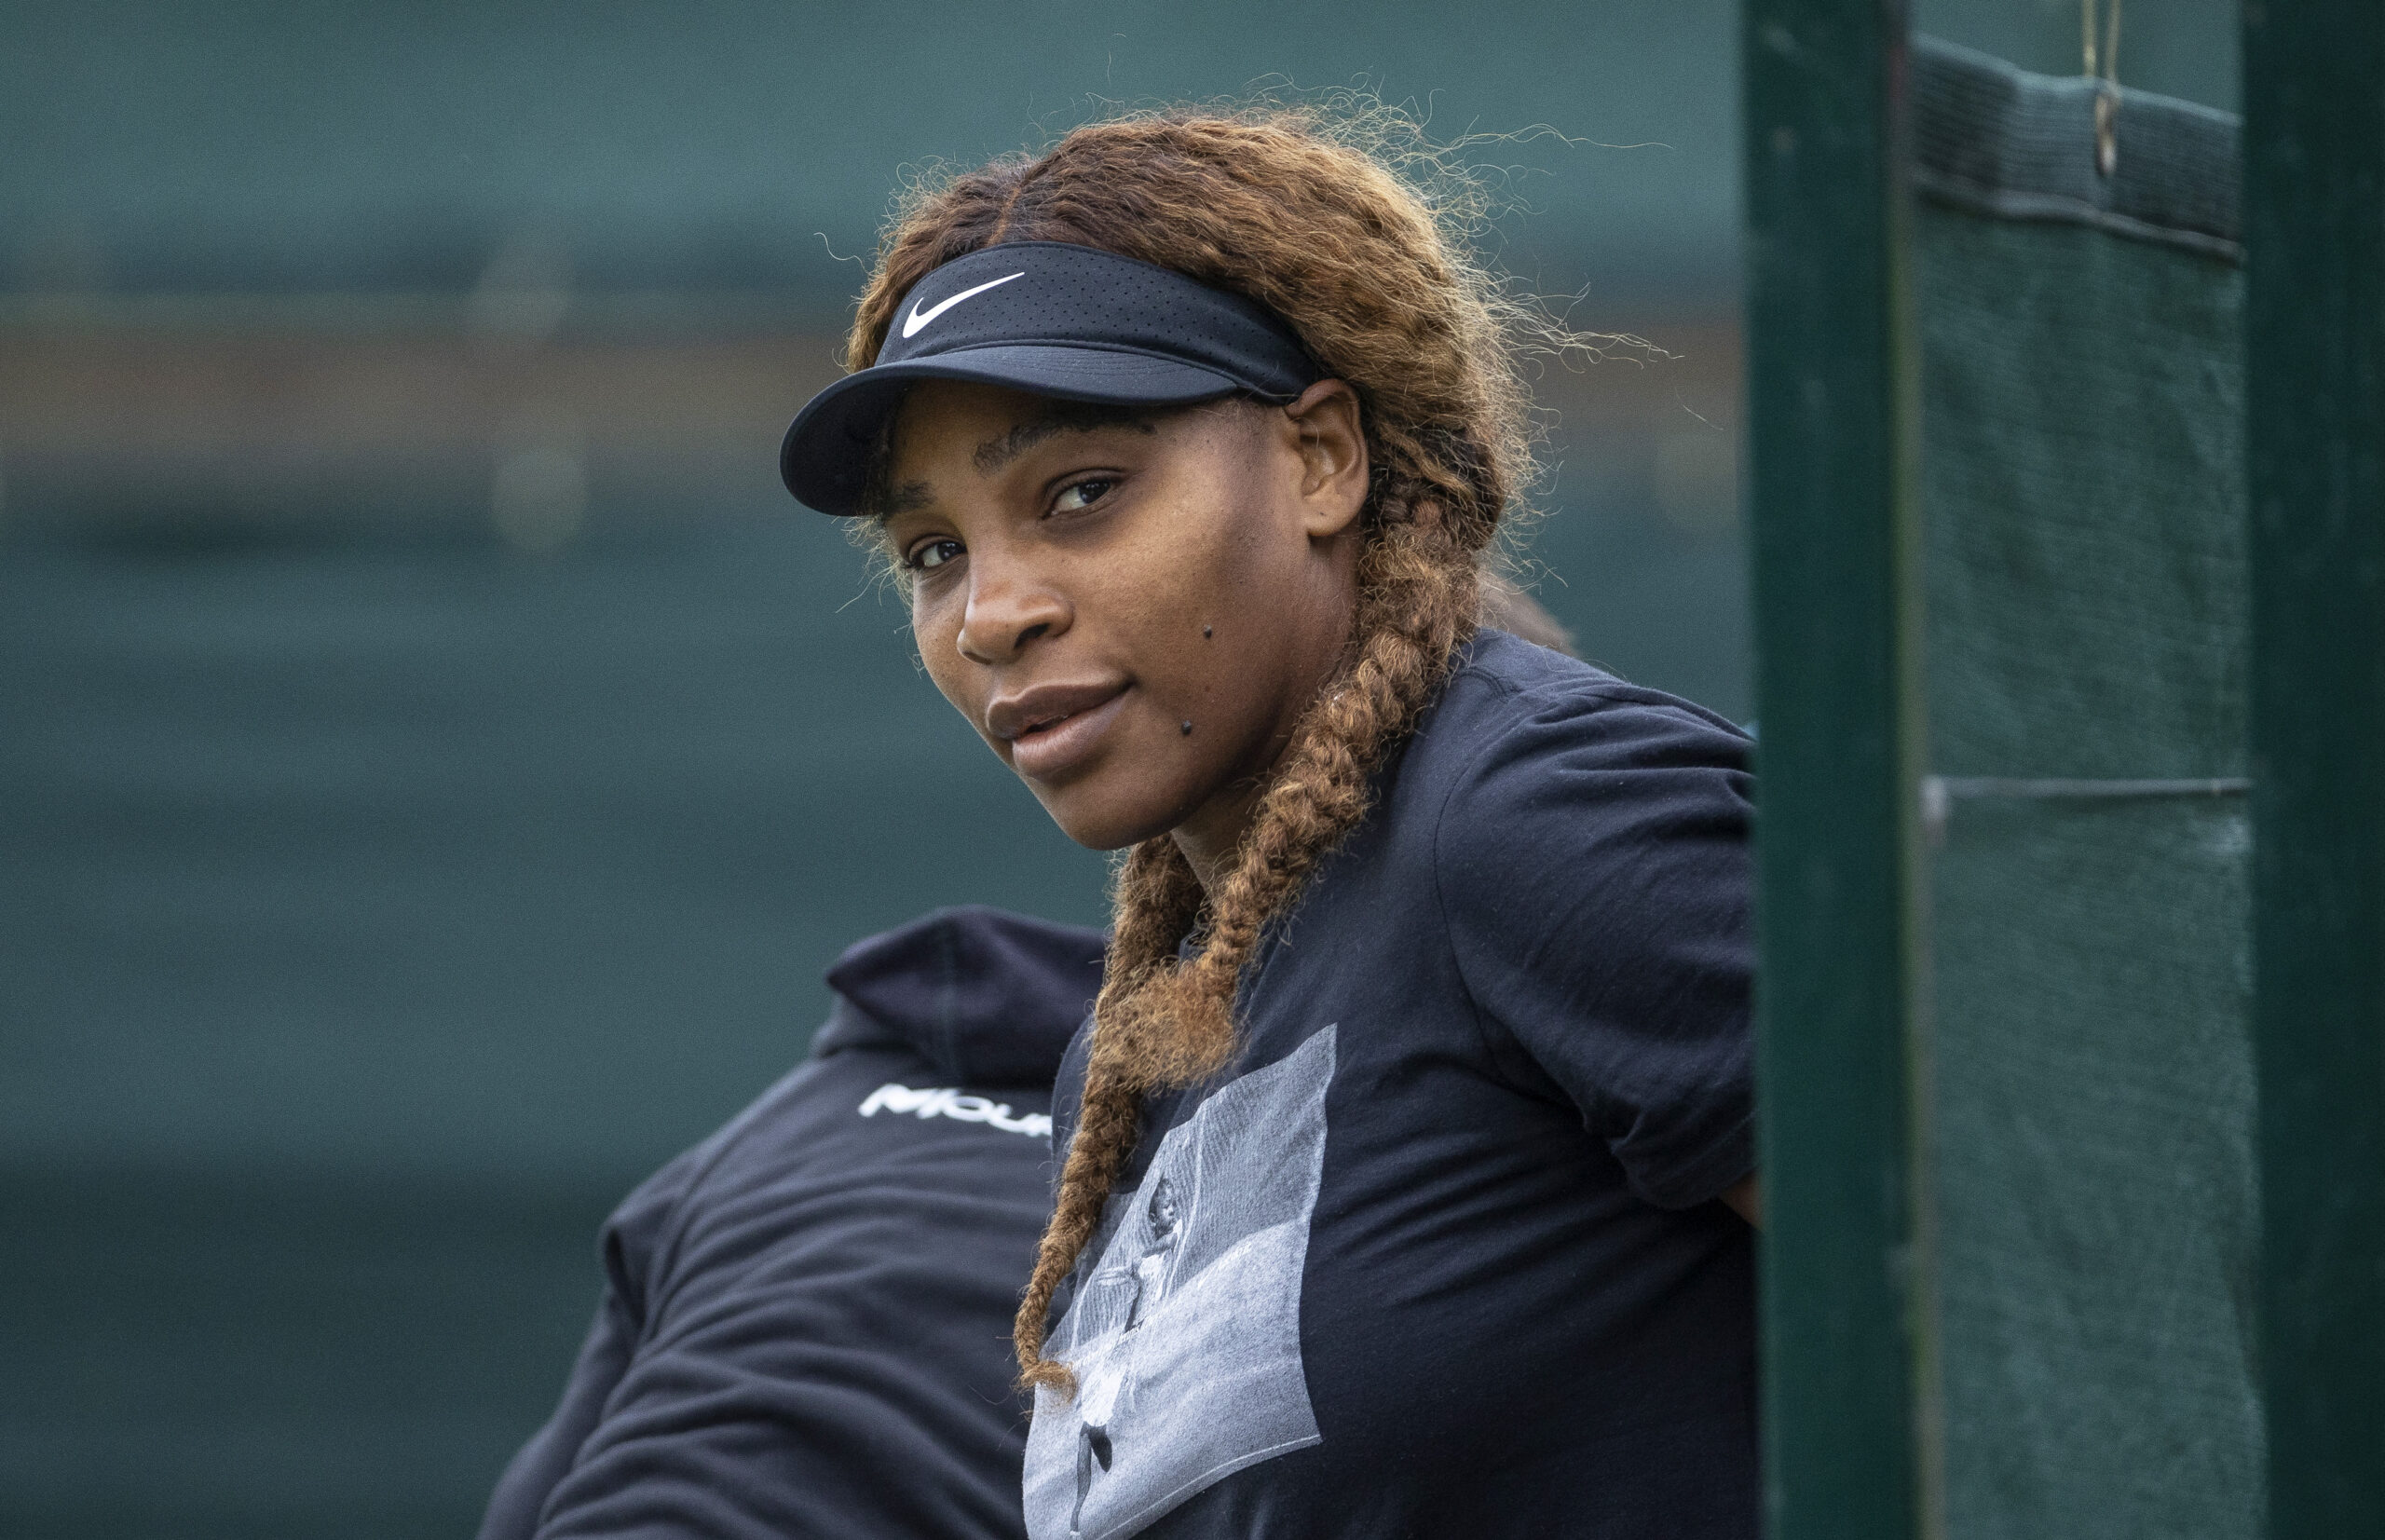 Serena Williams comeback put to rest after second baby girl